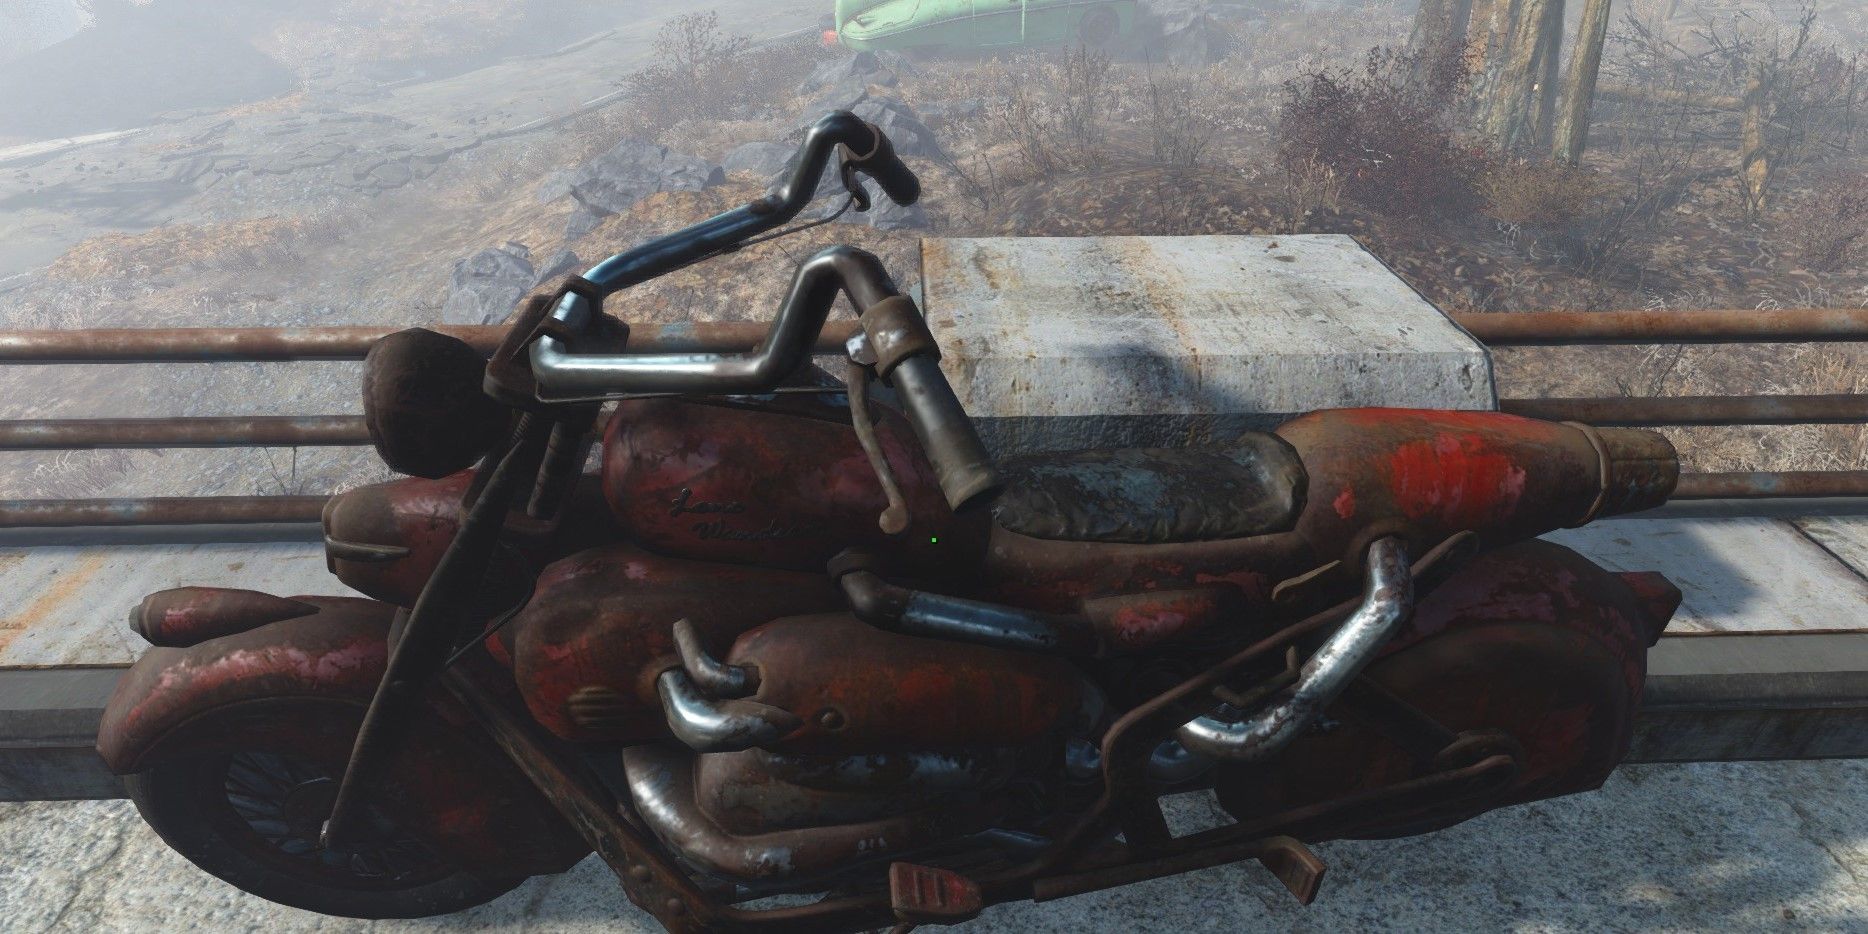 Nuclear Powered Motorbike From Fallout 4